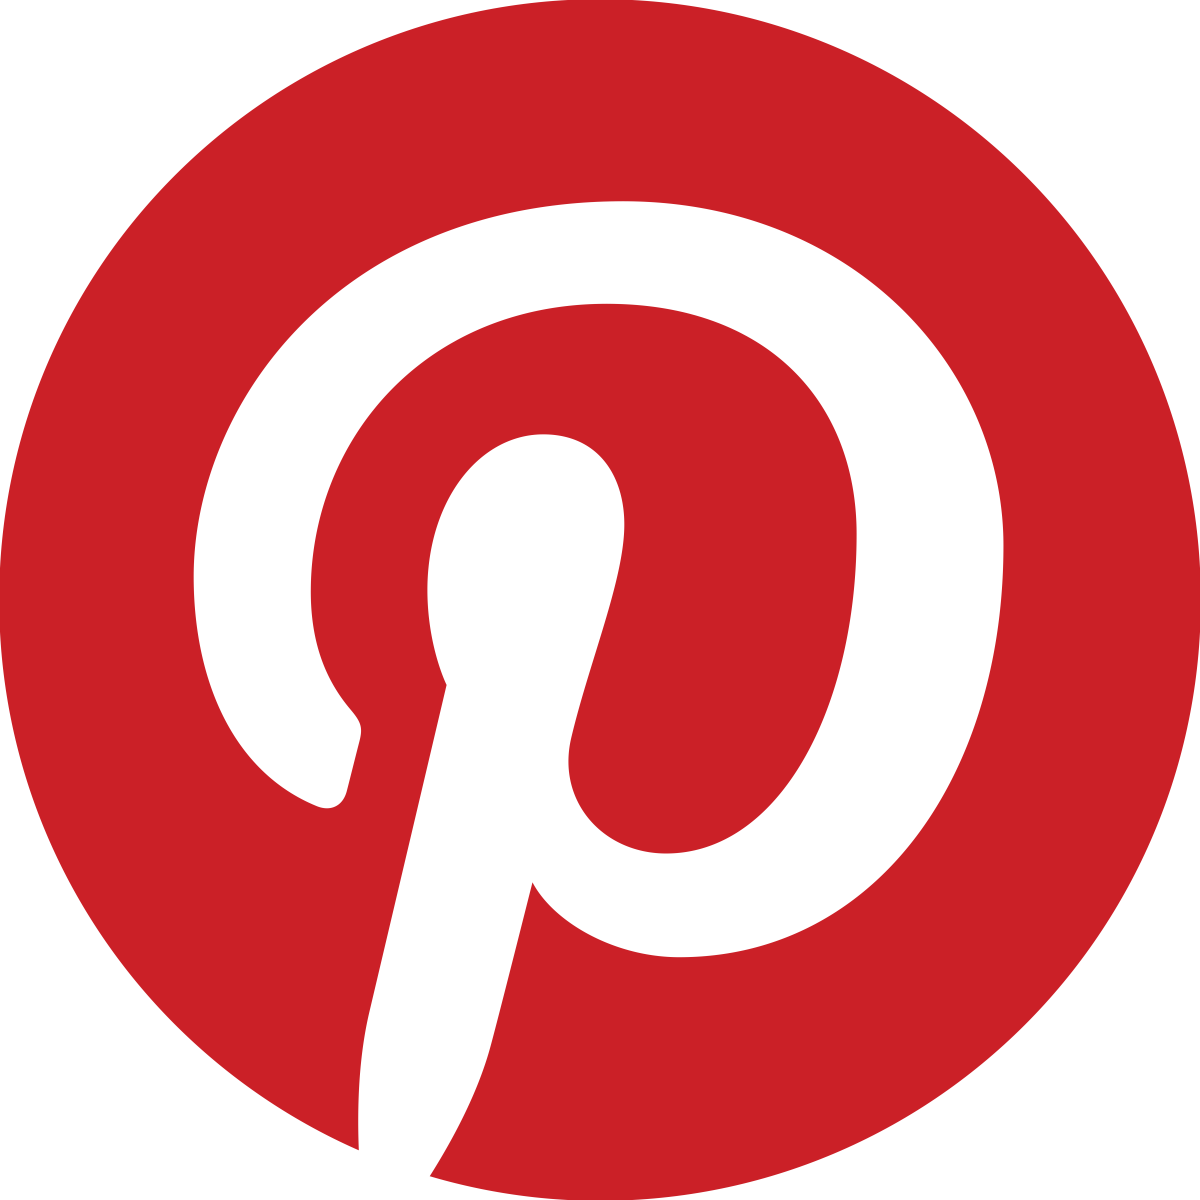 How to Drive Traffic to Your Blog Using Pinterest.com - Create Pinterest Events to Interact with Your Readers